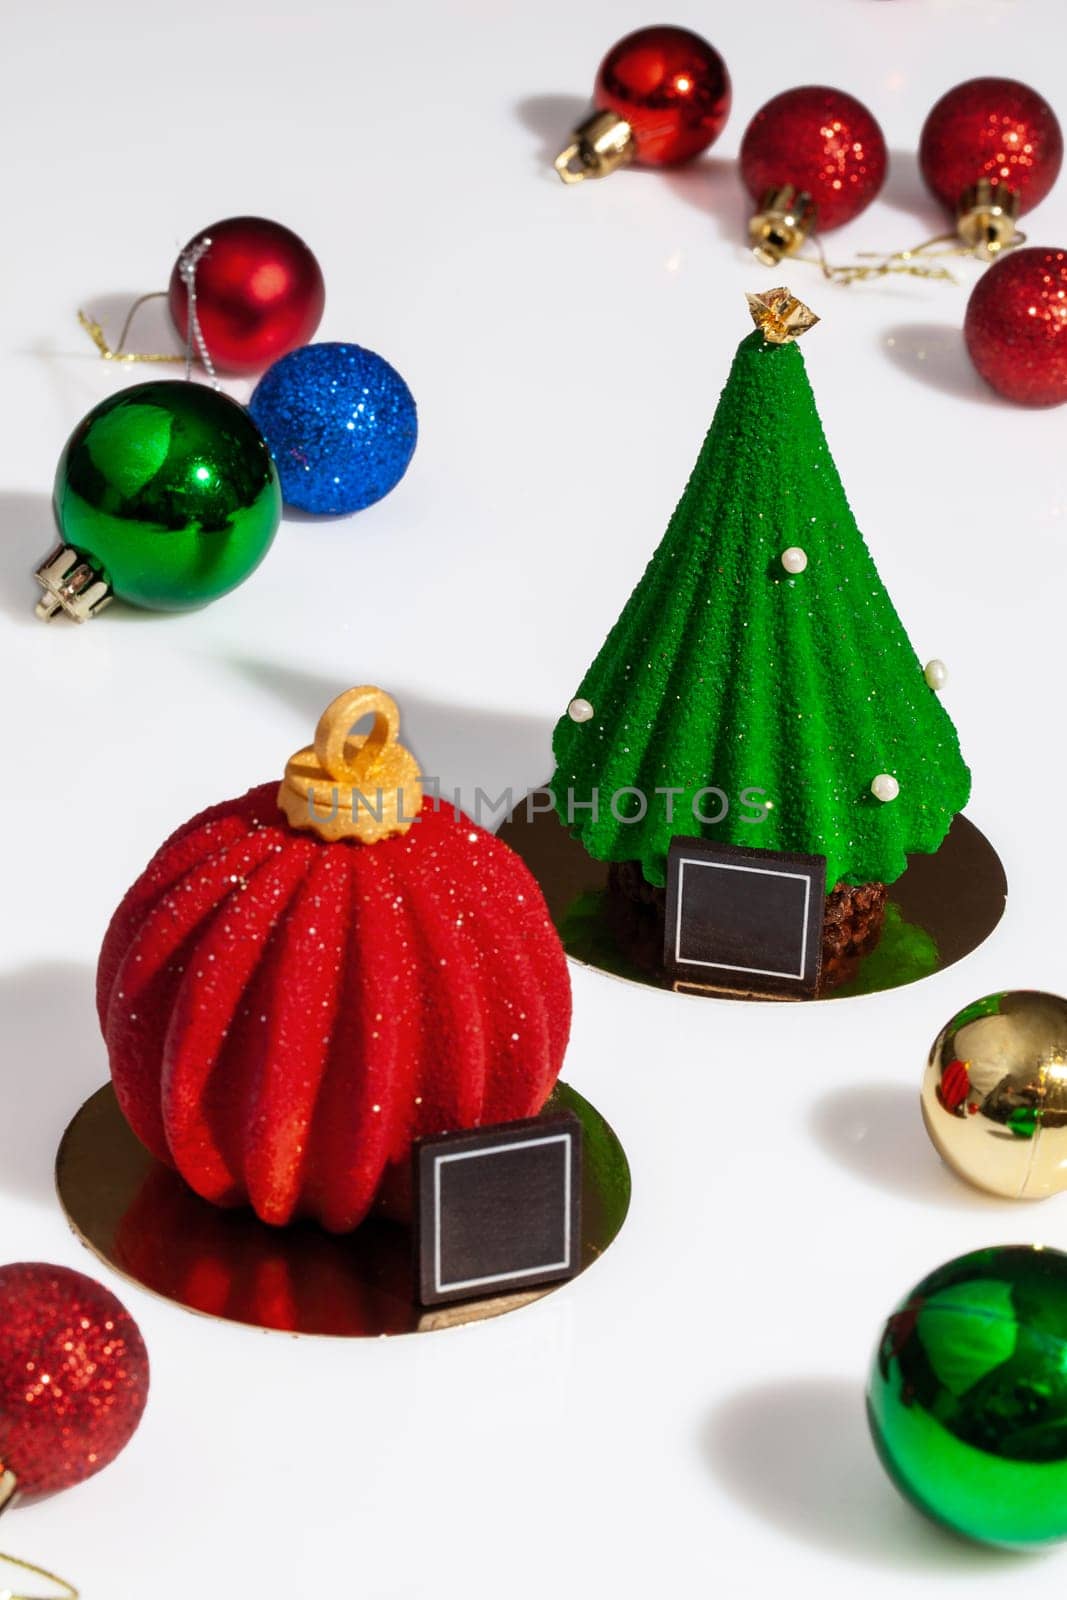 Pastries in shape of Christmas tree and red ball by nazarovsergey